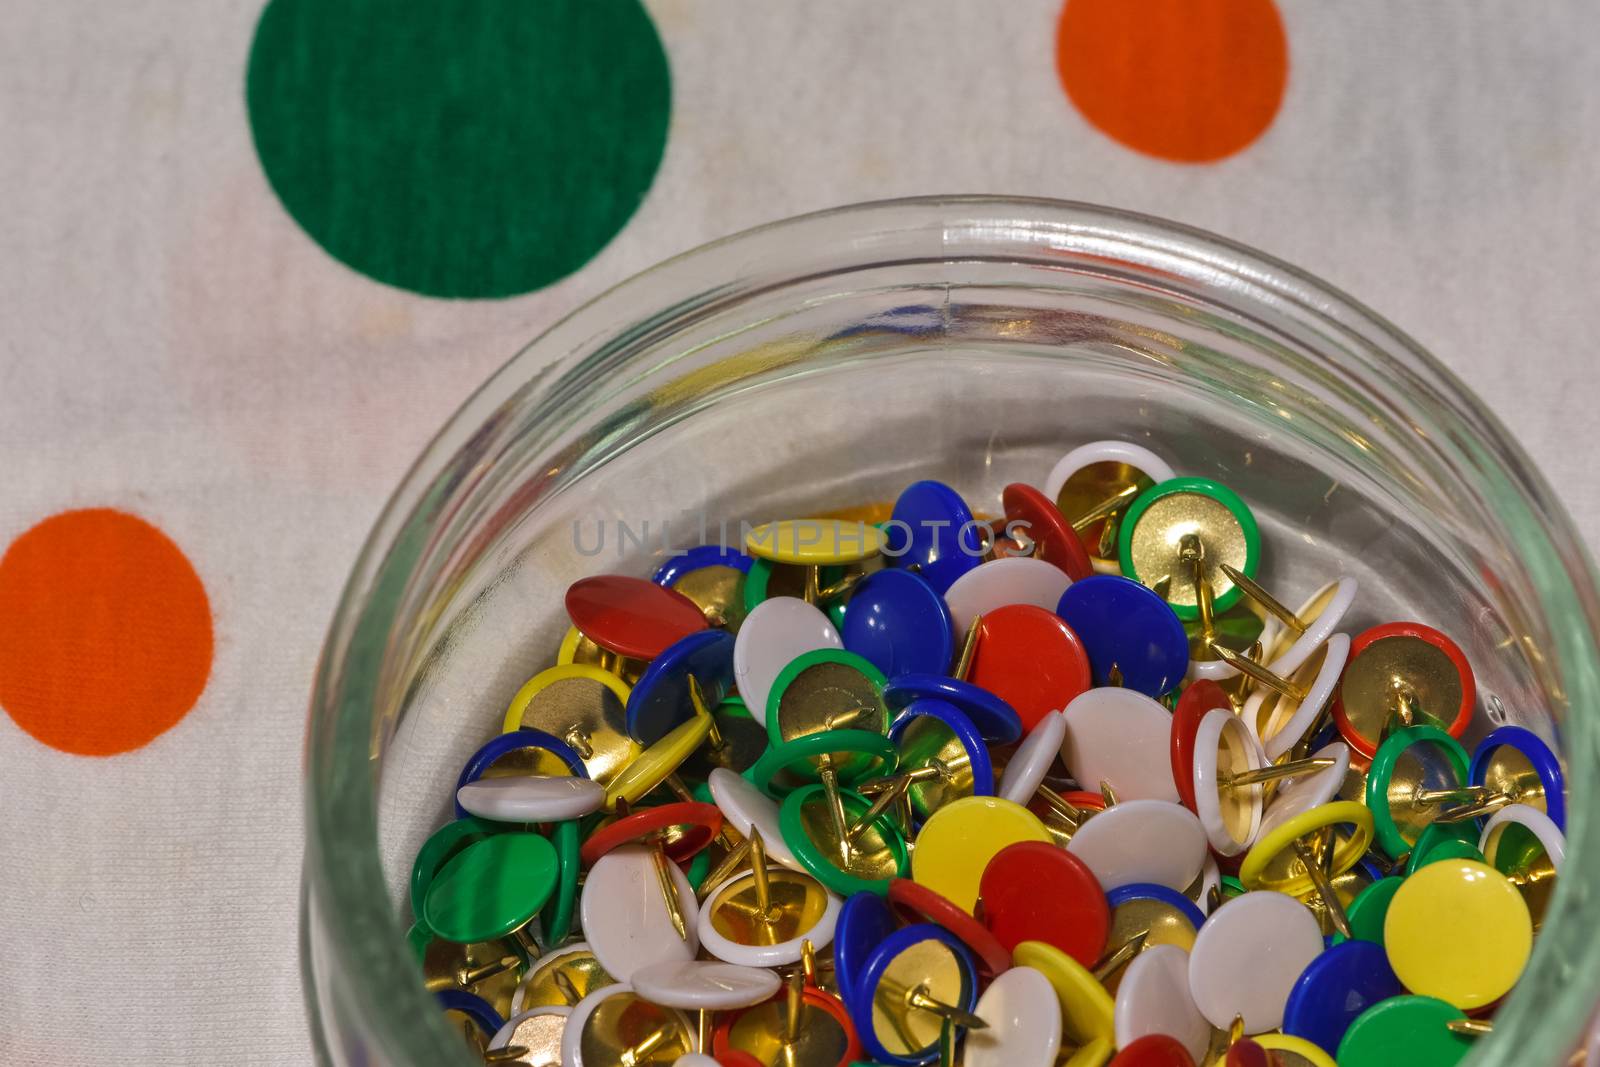 colored thumbtacks in a glass jar by brambillasimone